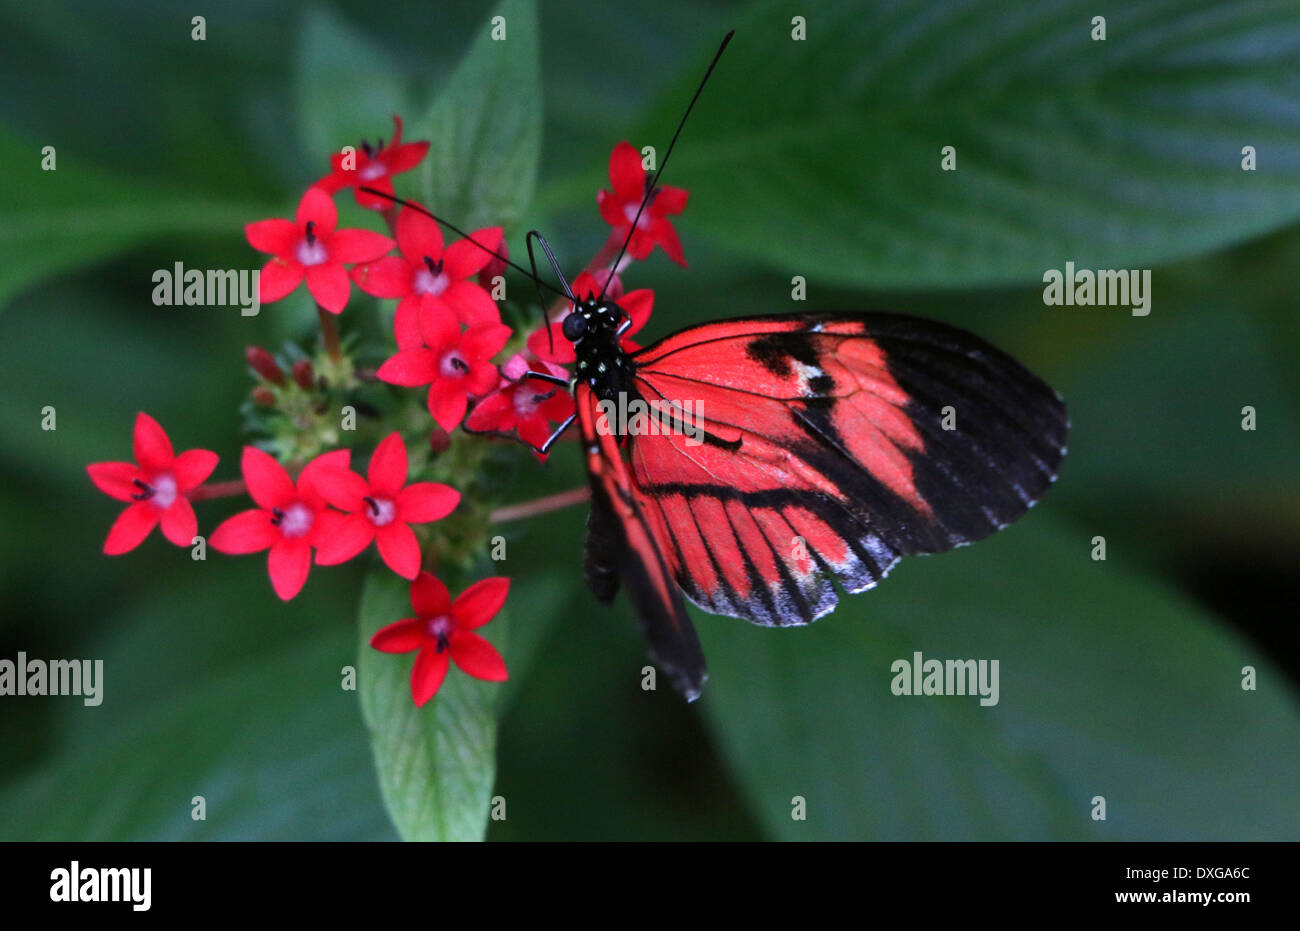 Postman Butterfly or Common Postman (Heliconius melpomene), 20 images in various hybrid forms Stock Photo